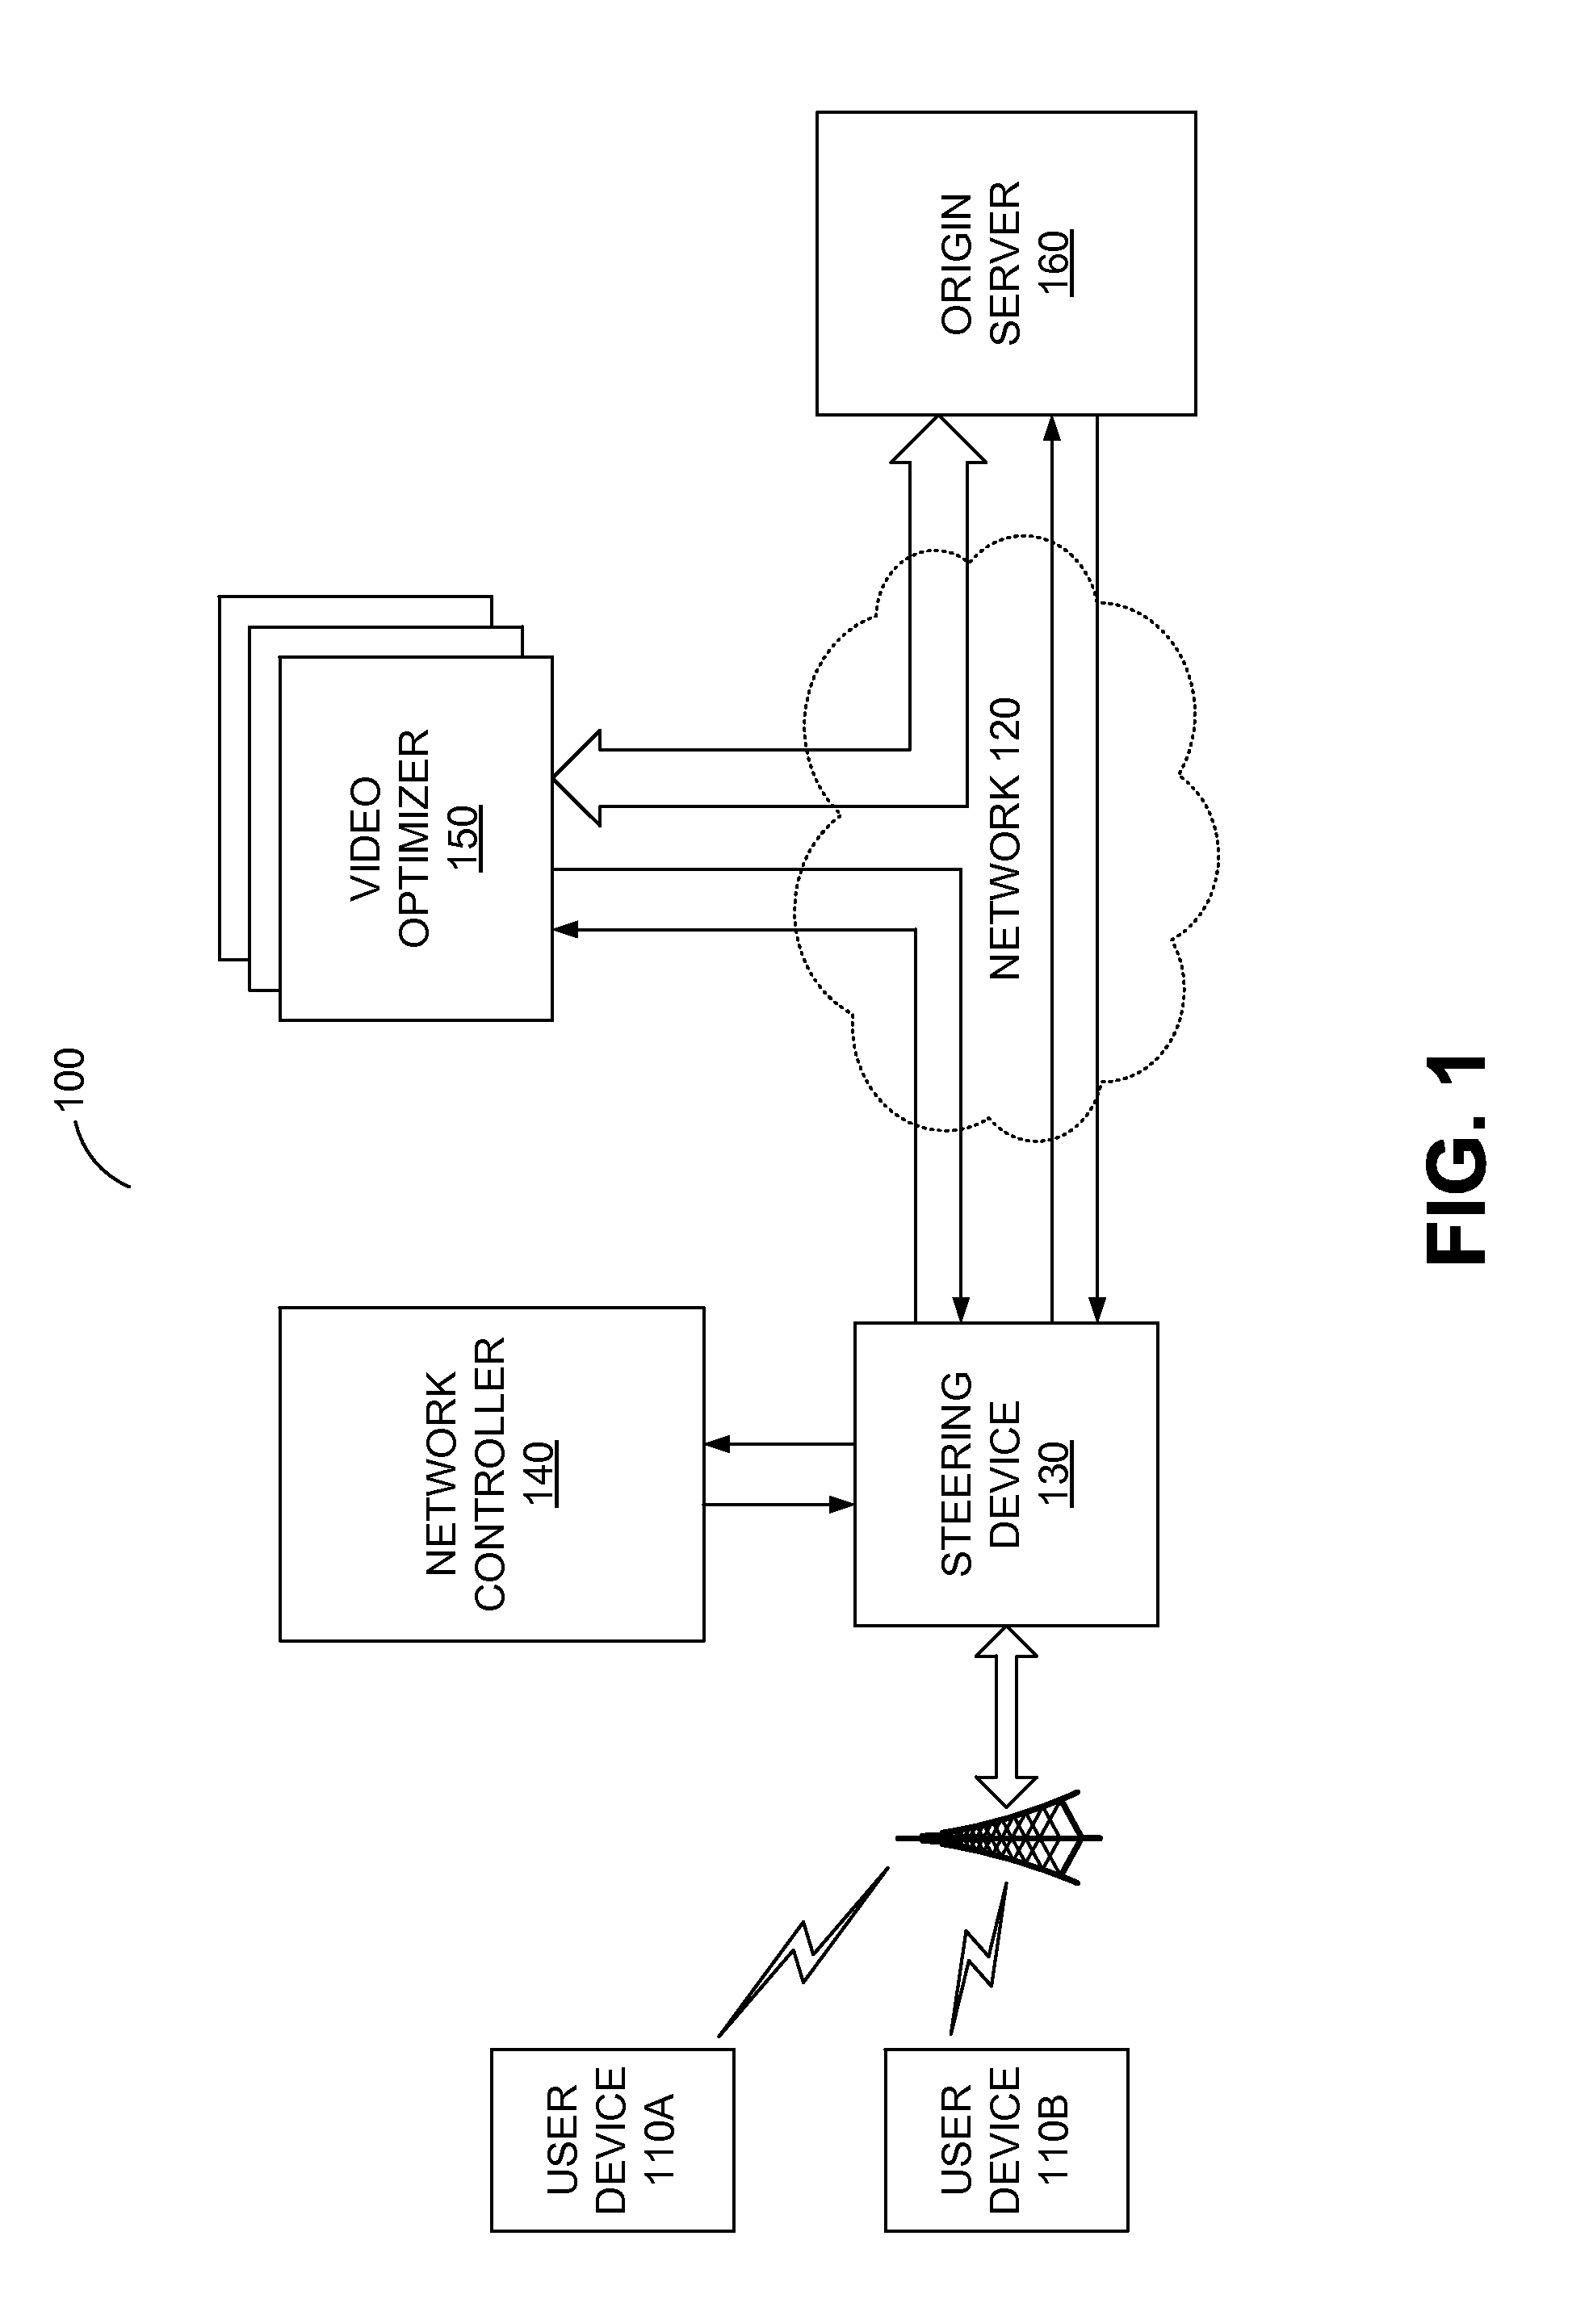 Real-Time Network Monitoring and Subscriber Identification with an On-Demand Appliance